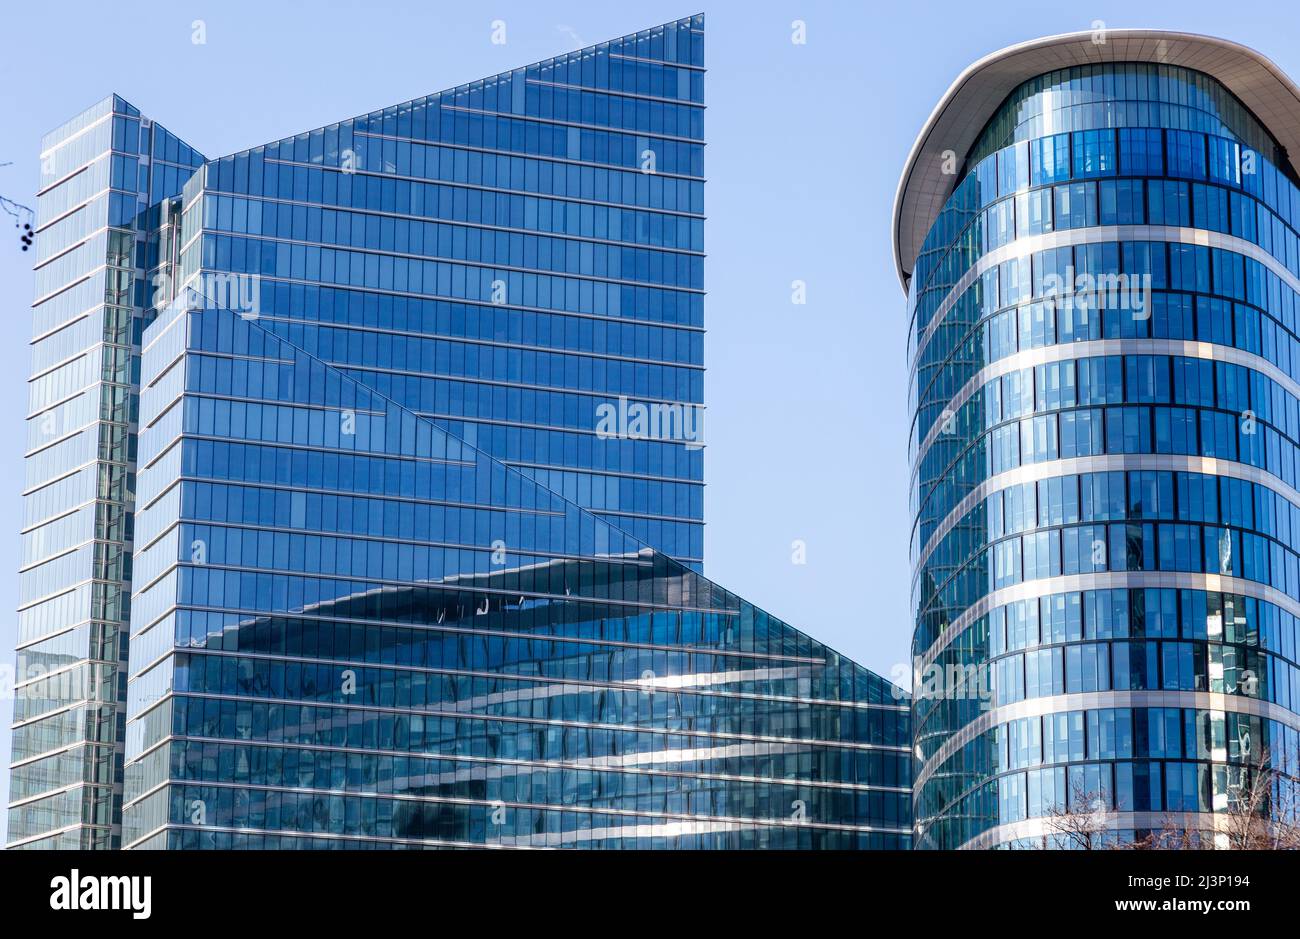 Administrative buildings, in major blue, around Place Rogier in Brussels Stock Photo